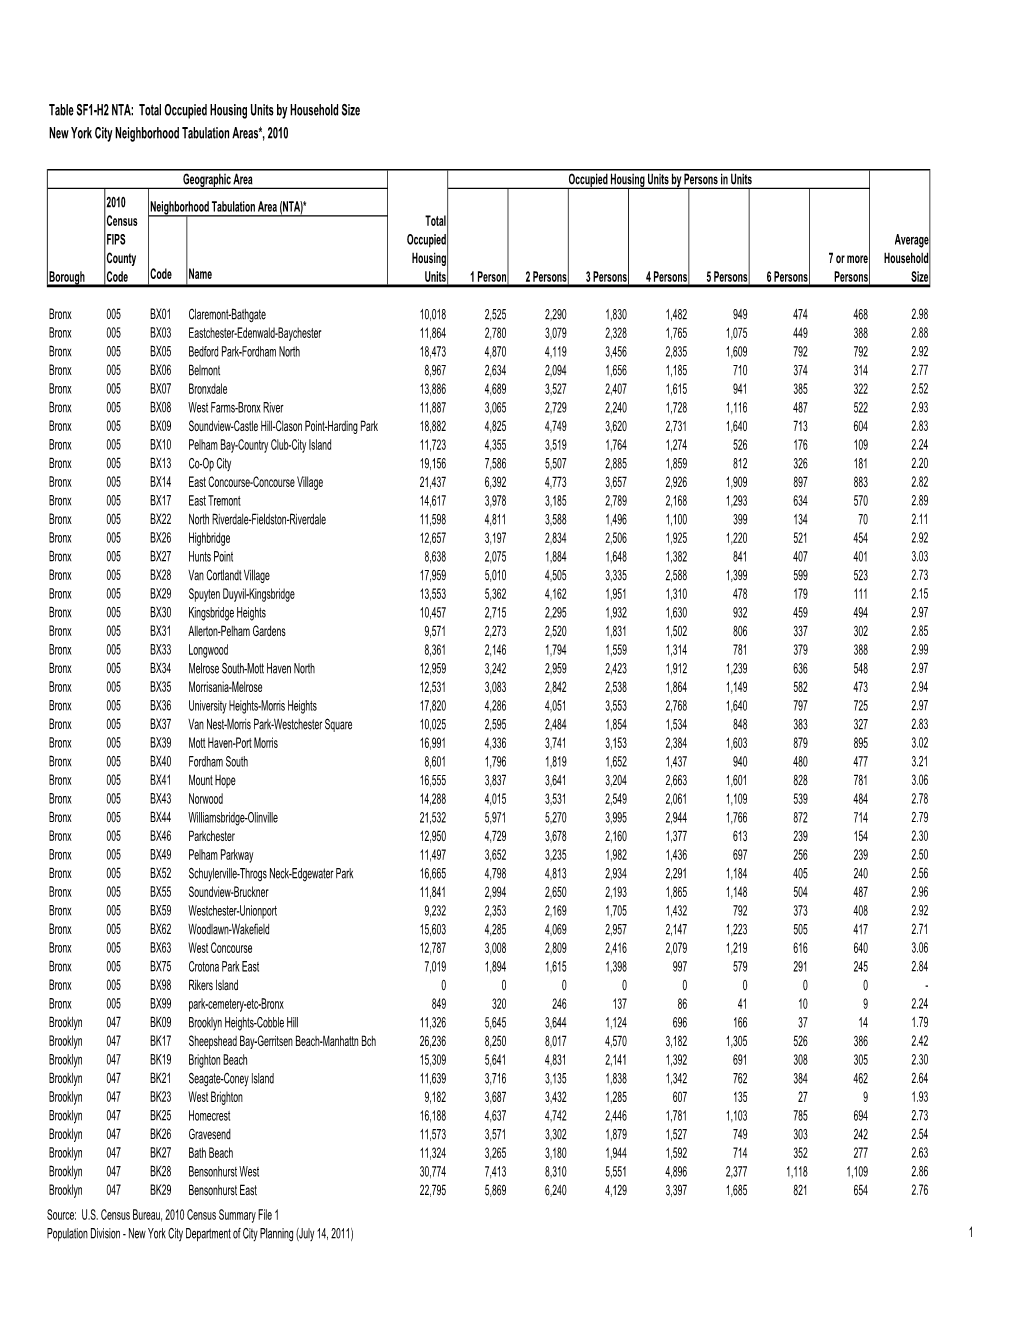 Table SF1-H2 NTA: Total Occupied Housing Units by Household Size New York City Neighborhood Tabulation Areas*, 2010